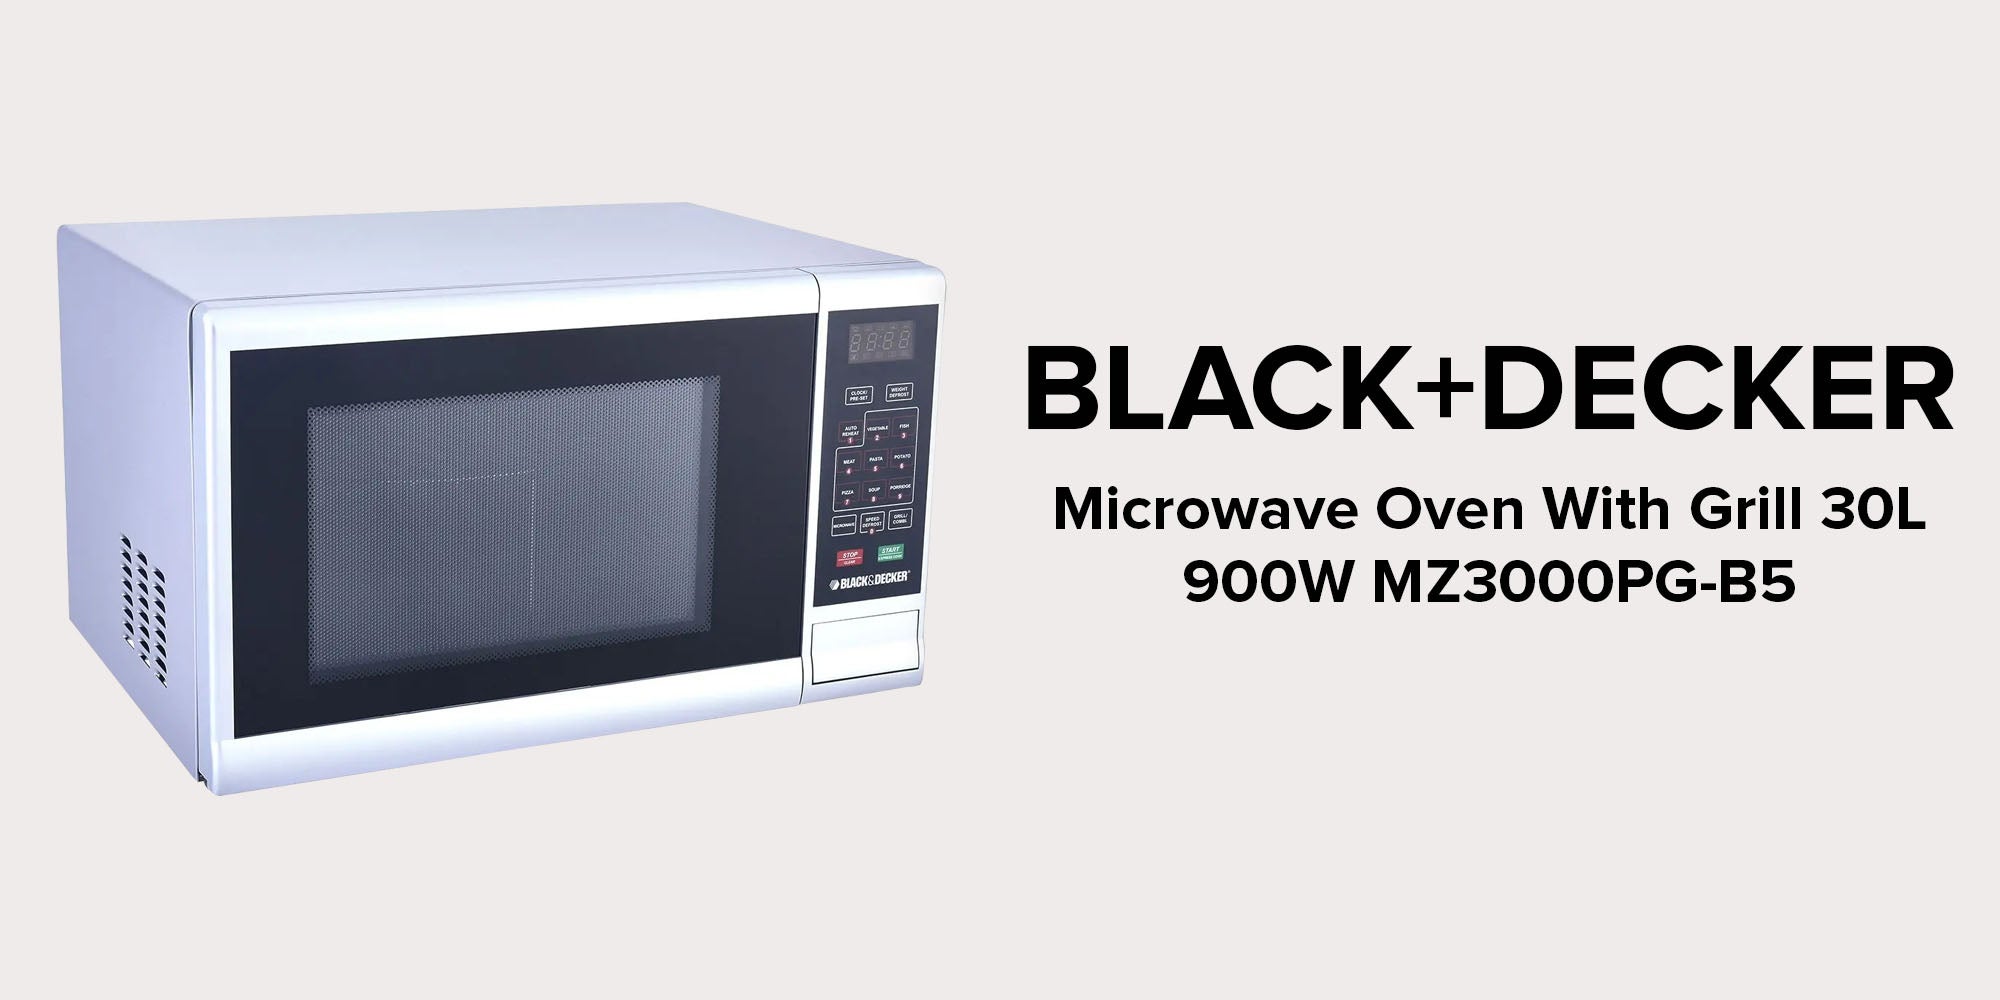 Microwave Oven With Grill And Defrost Function 30 L 900 W MZ3000PG-B5 Silver/Black